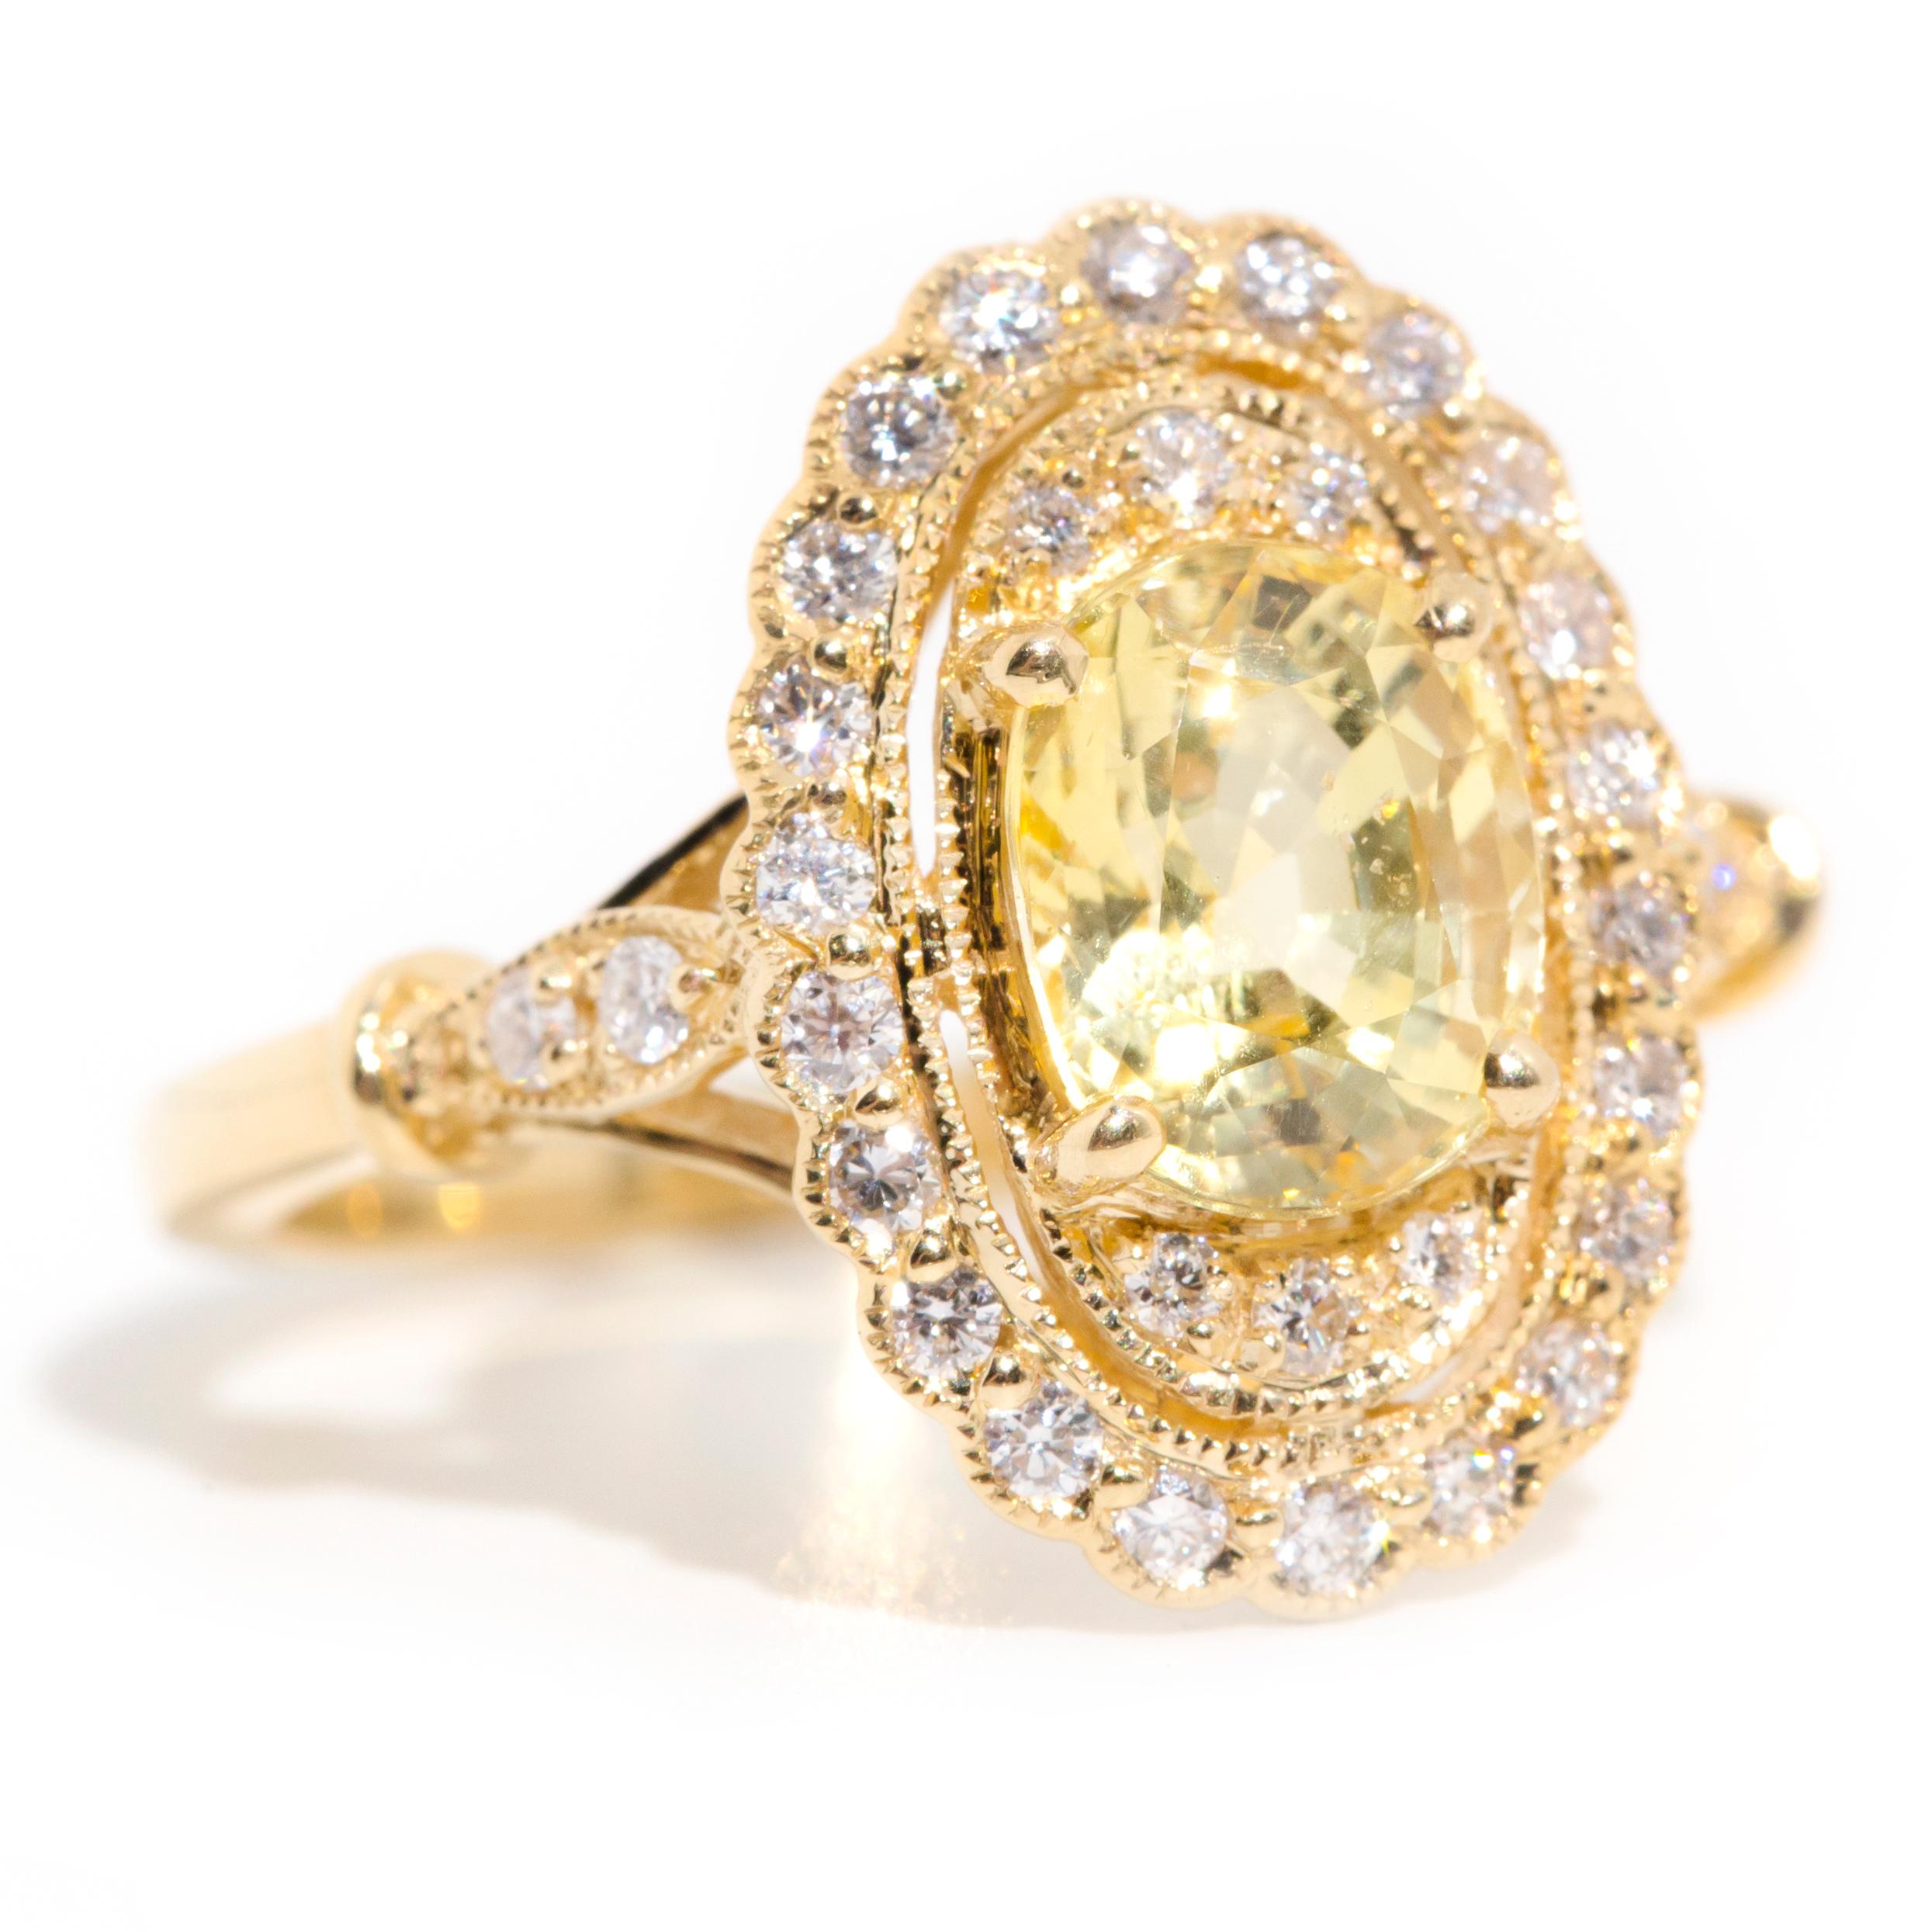 Contemporary 2.33 Carat Yellow Ceylon Sapphire and Diamond Halo Ring in 18 Carat Yellow Gold  For Sale